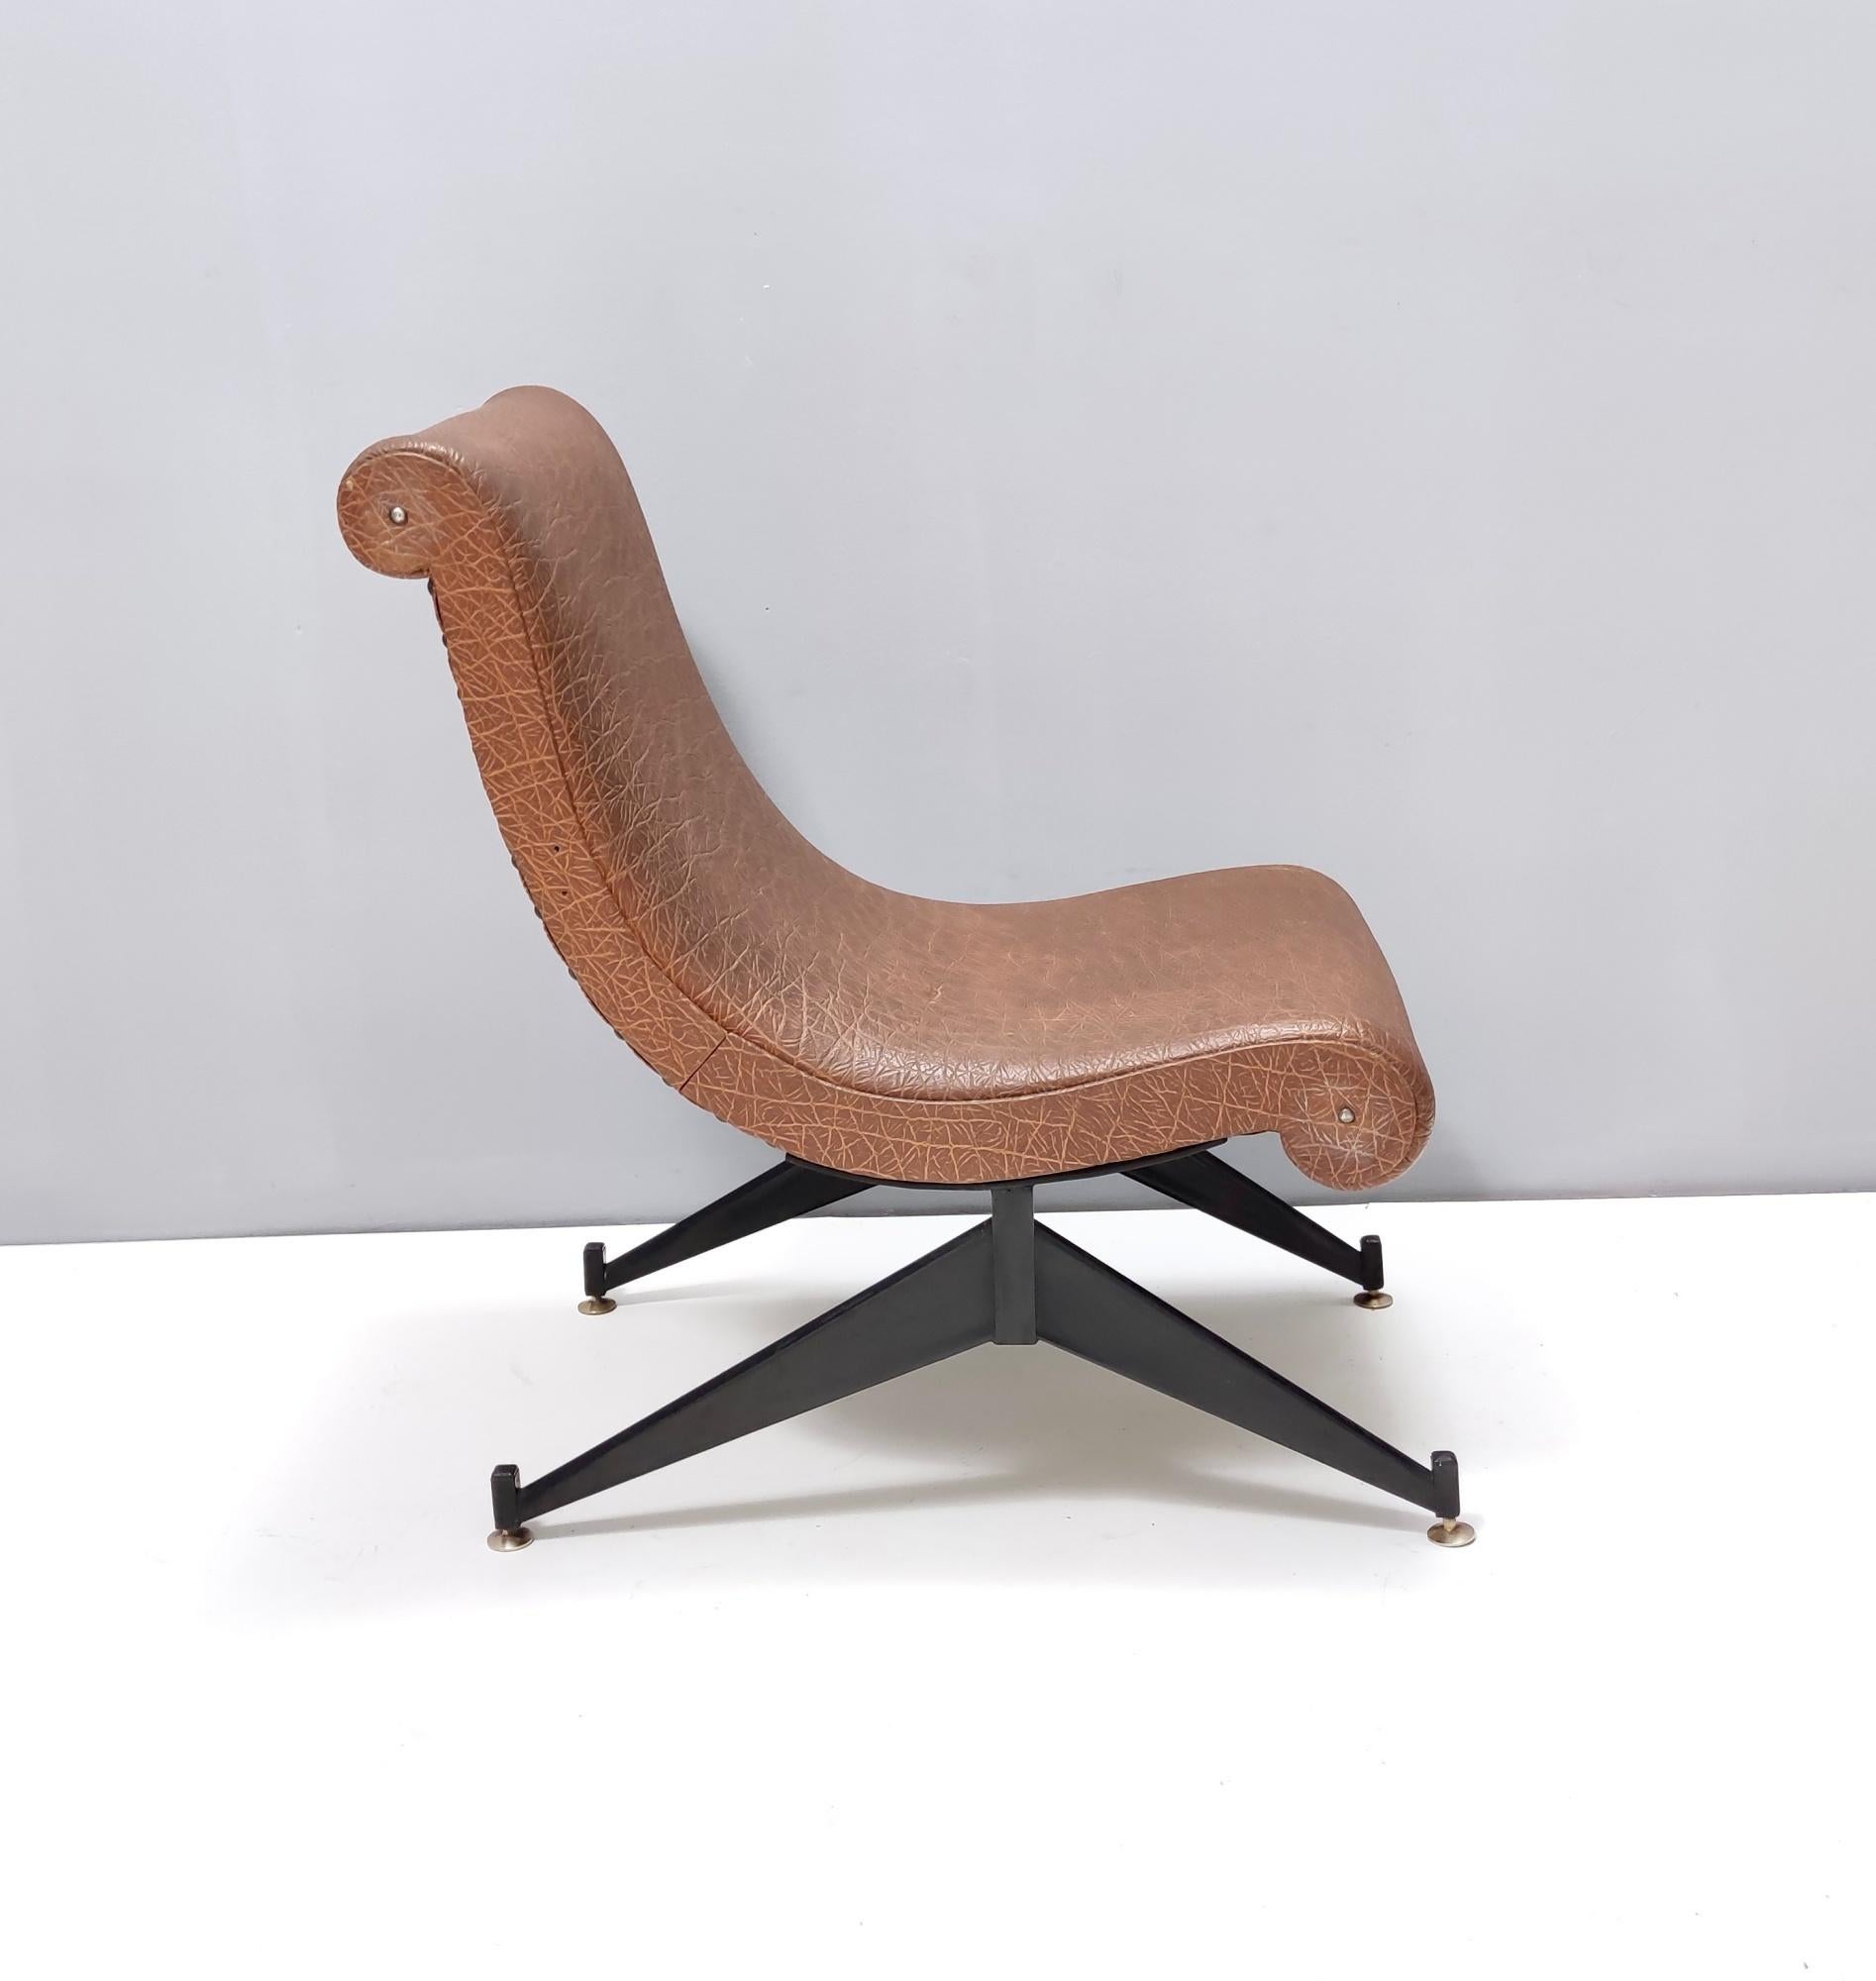 Mid-20th Century Vintage Brown Skai Lounge Chair with Black Varnished Metal Legs, Italy For Sale